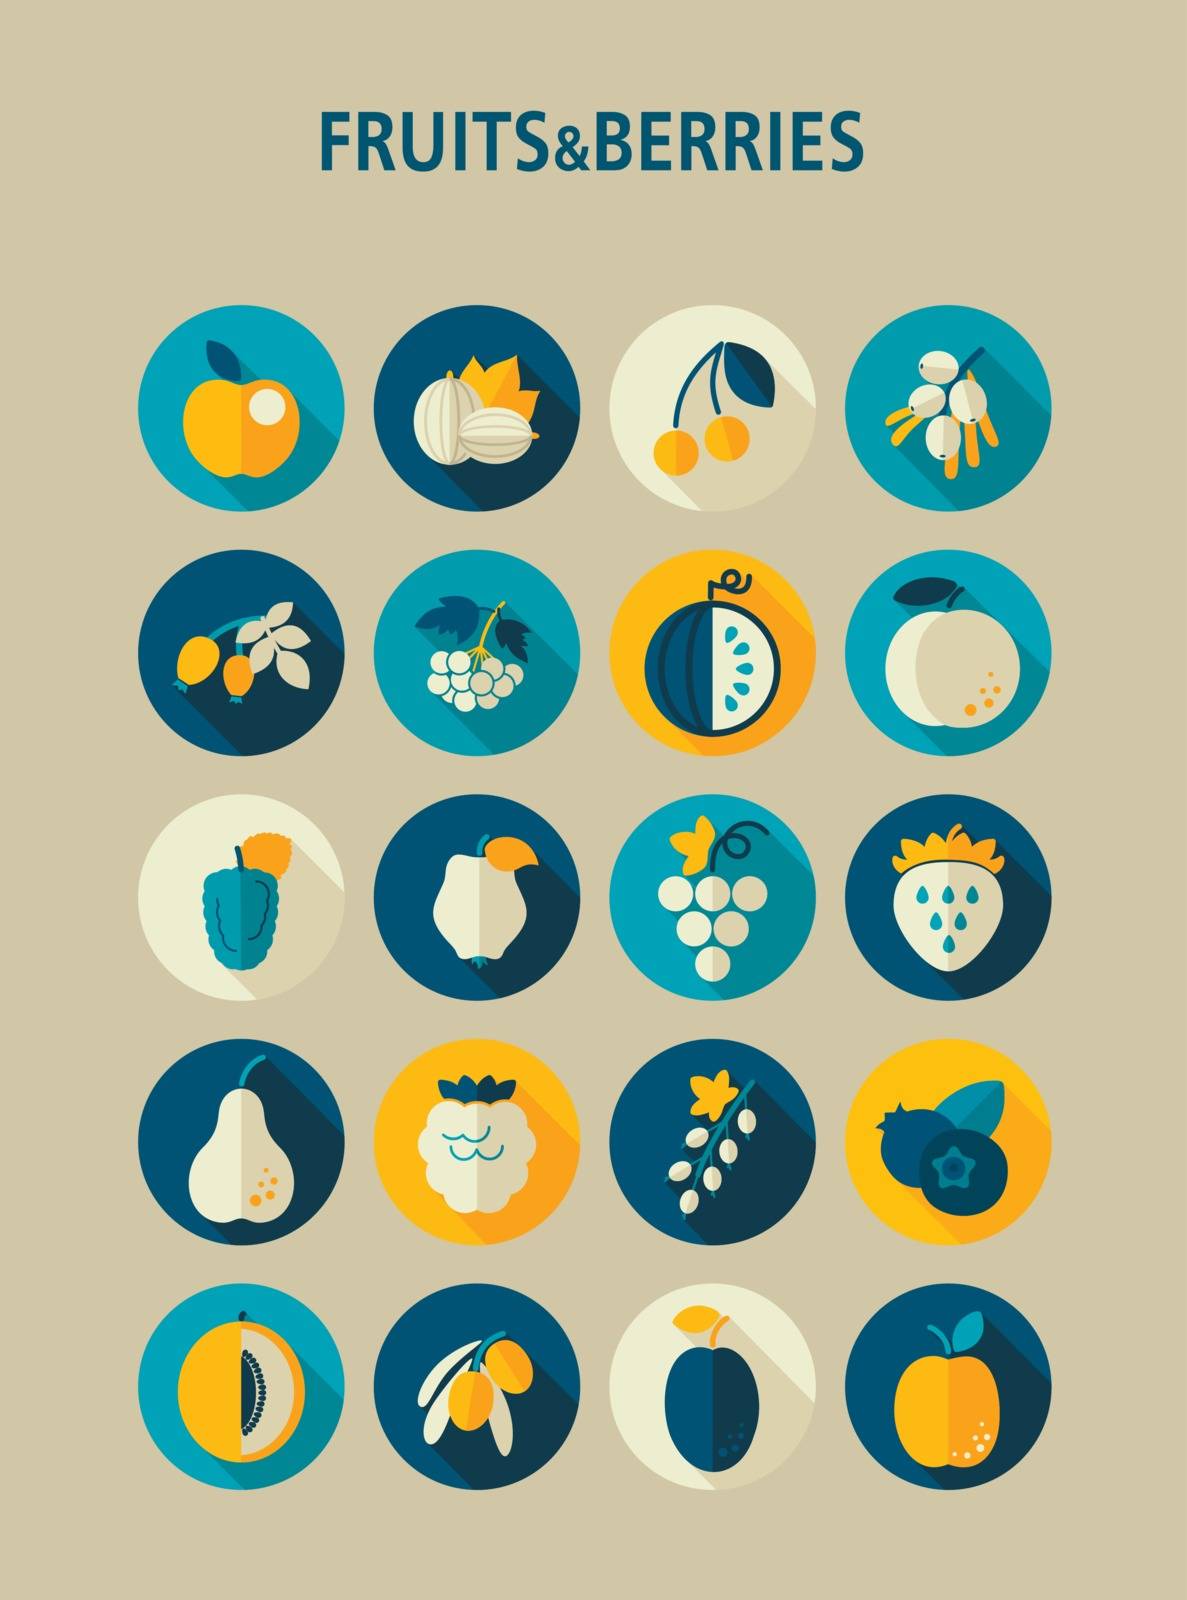 Set of Fruits and Berries icons set. Vector illustration for food apps and websites